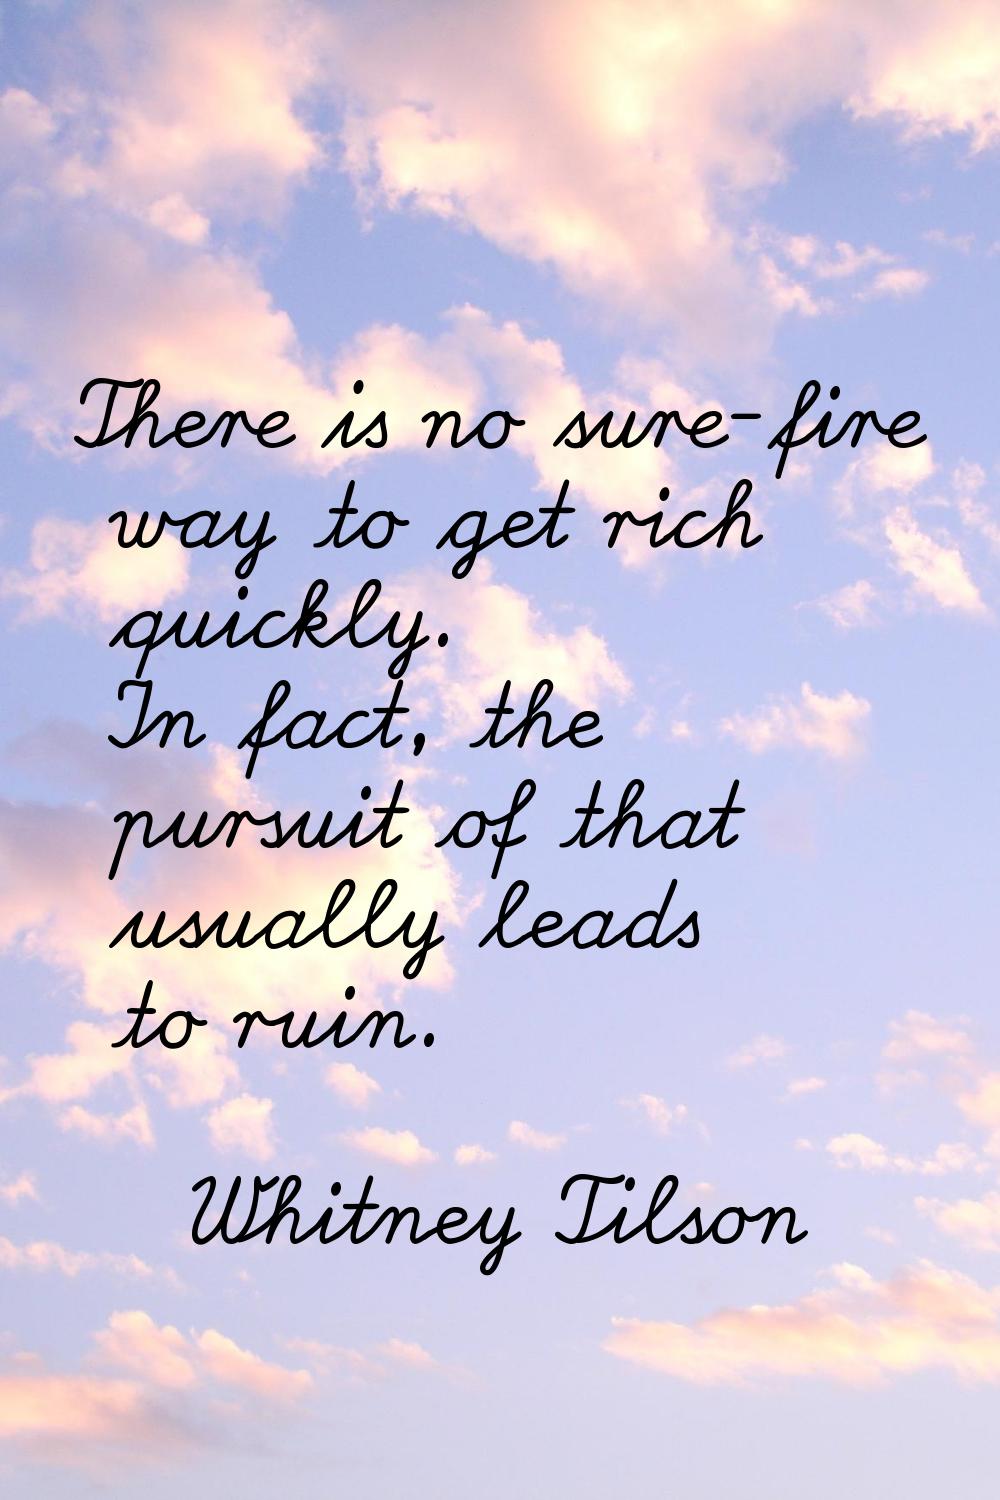 There is no sure-fire way to get rich quickly. In fact, the pursuit of that usually leads to ruin.